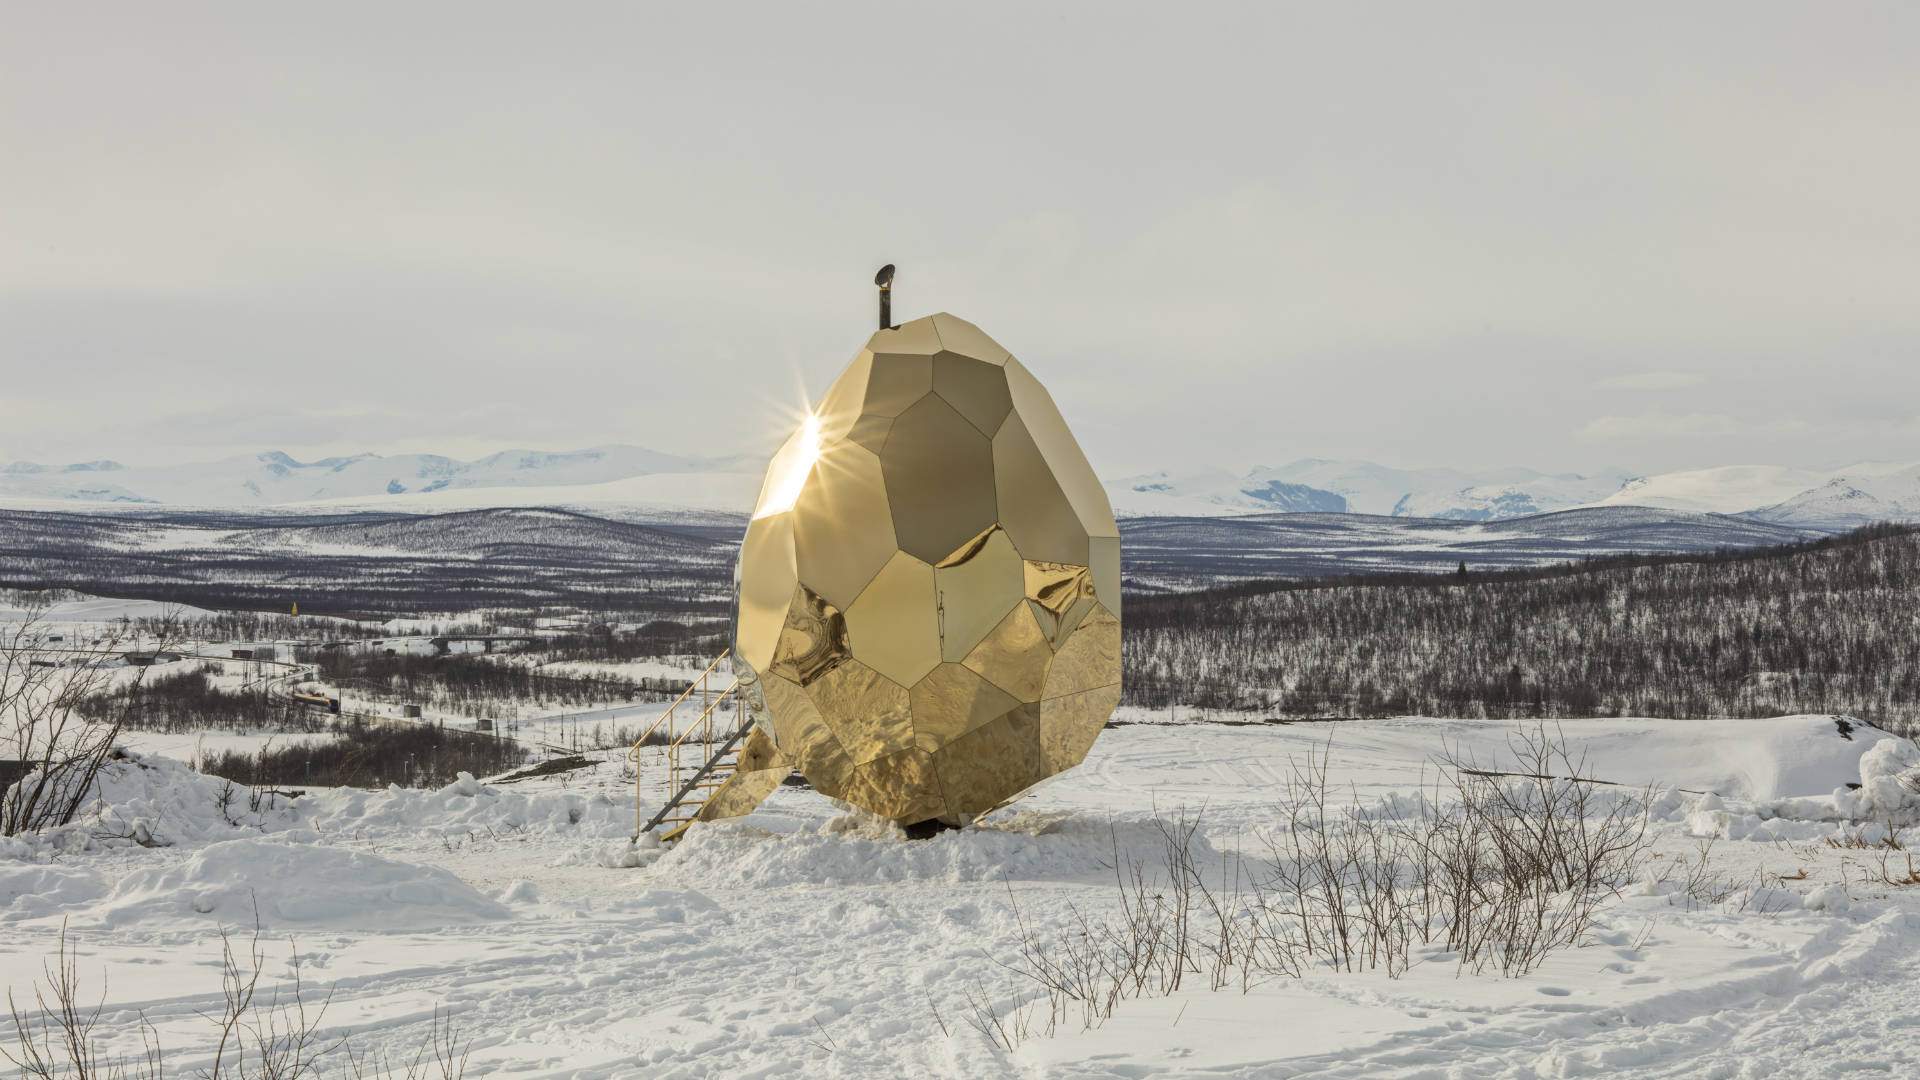 This Swedish Golden Egg-Shaped Sauna Is the Ultimate Outdoor Meeting Room